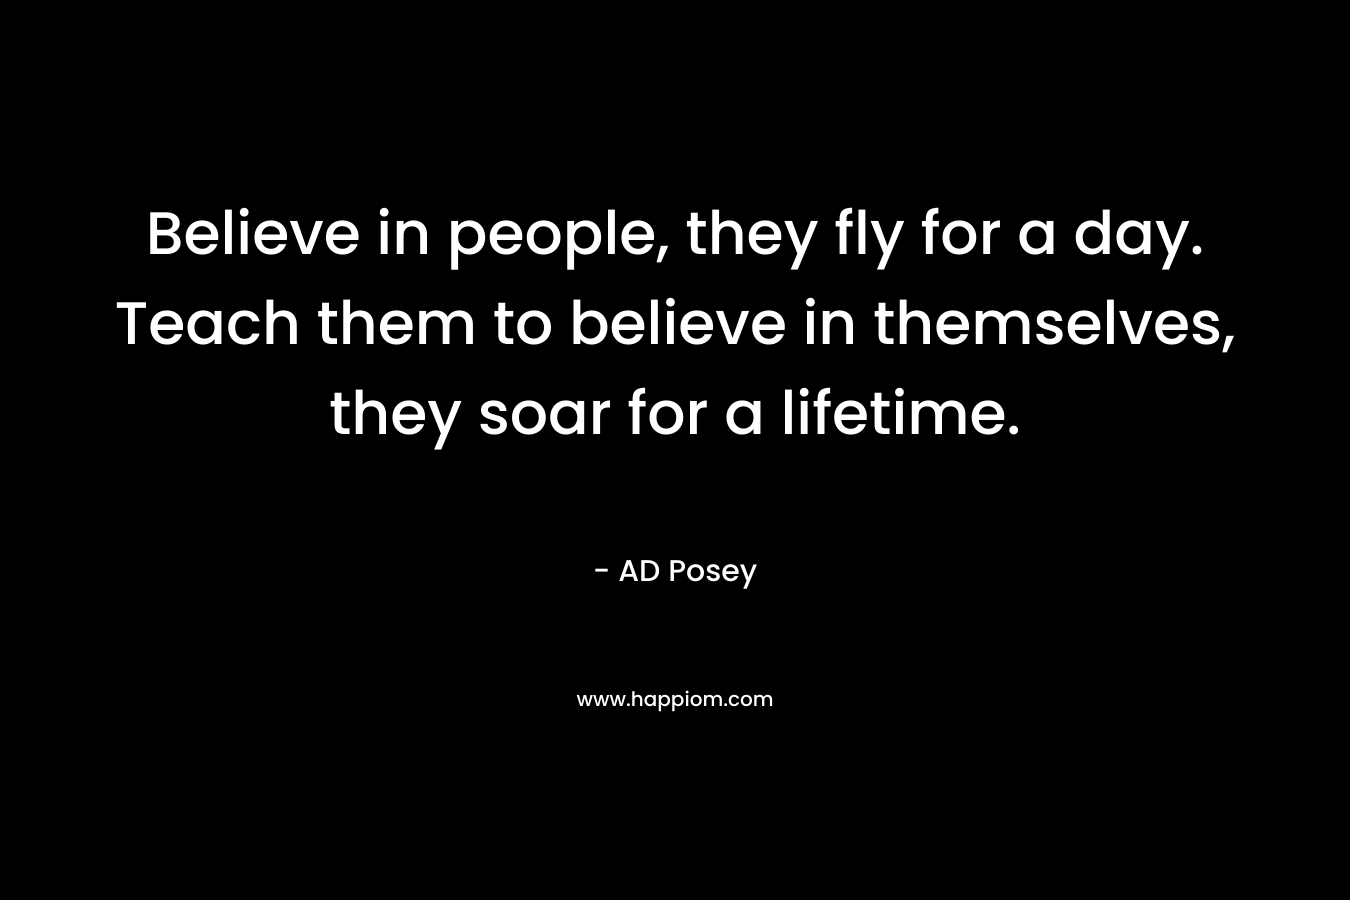 Believe in people, they fly for a day. Teach them to believe in themselves, they soar for a lifetime.